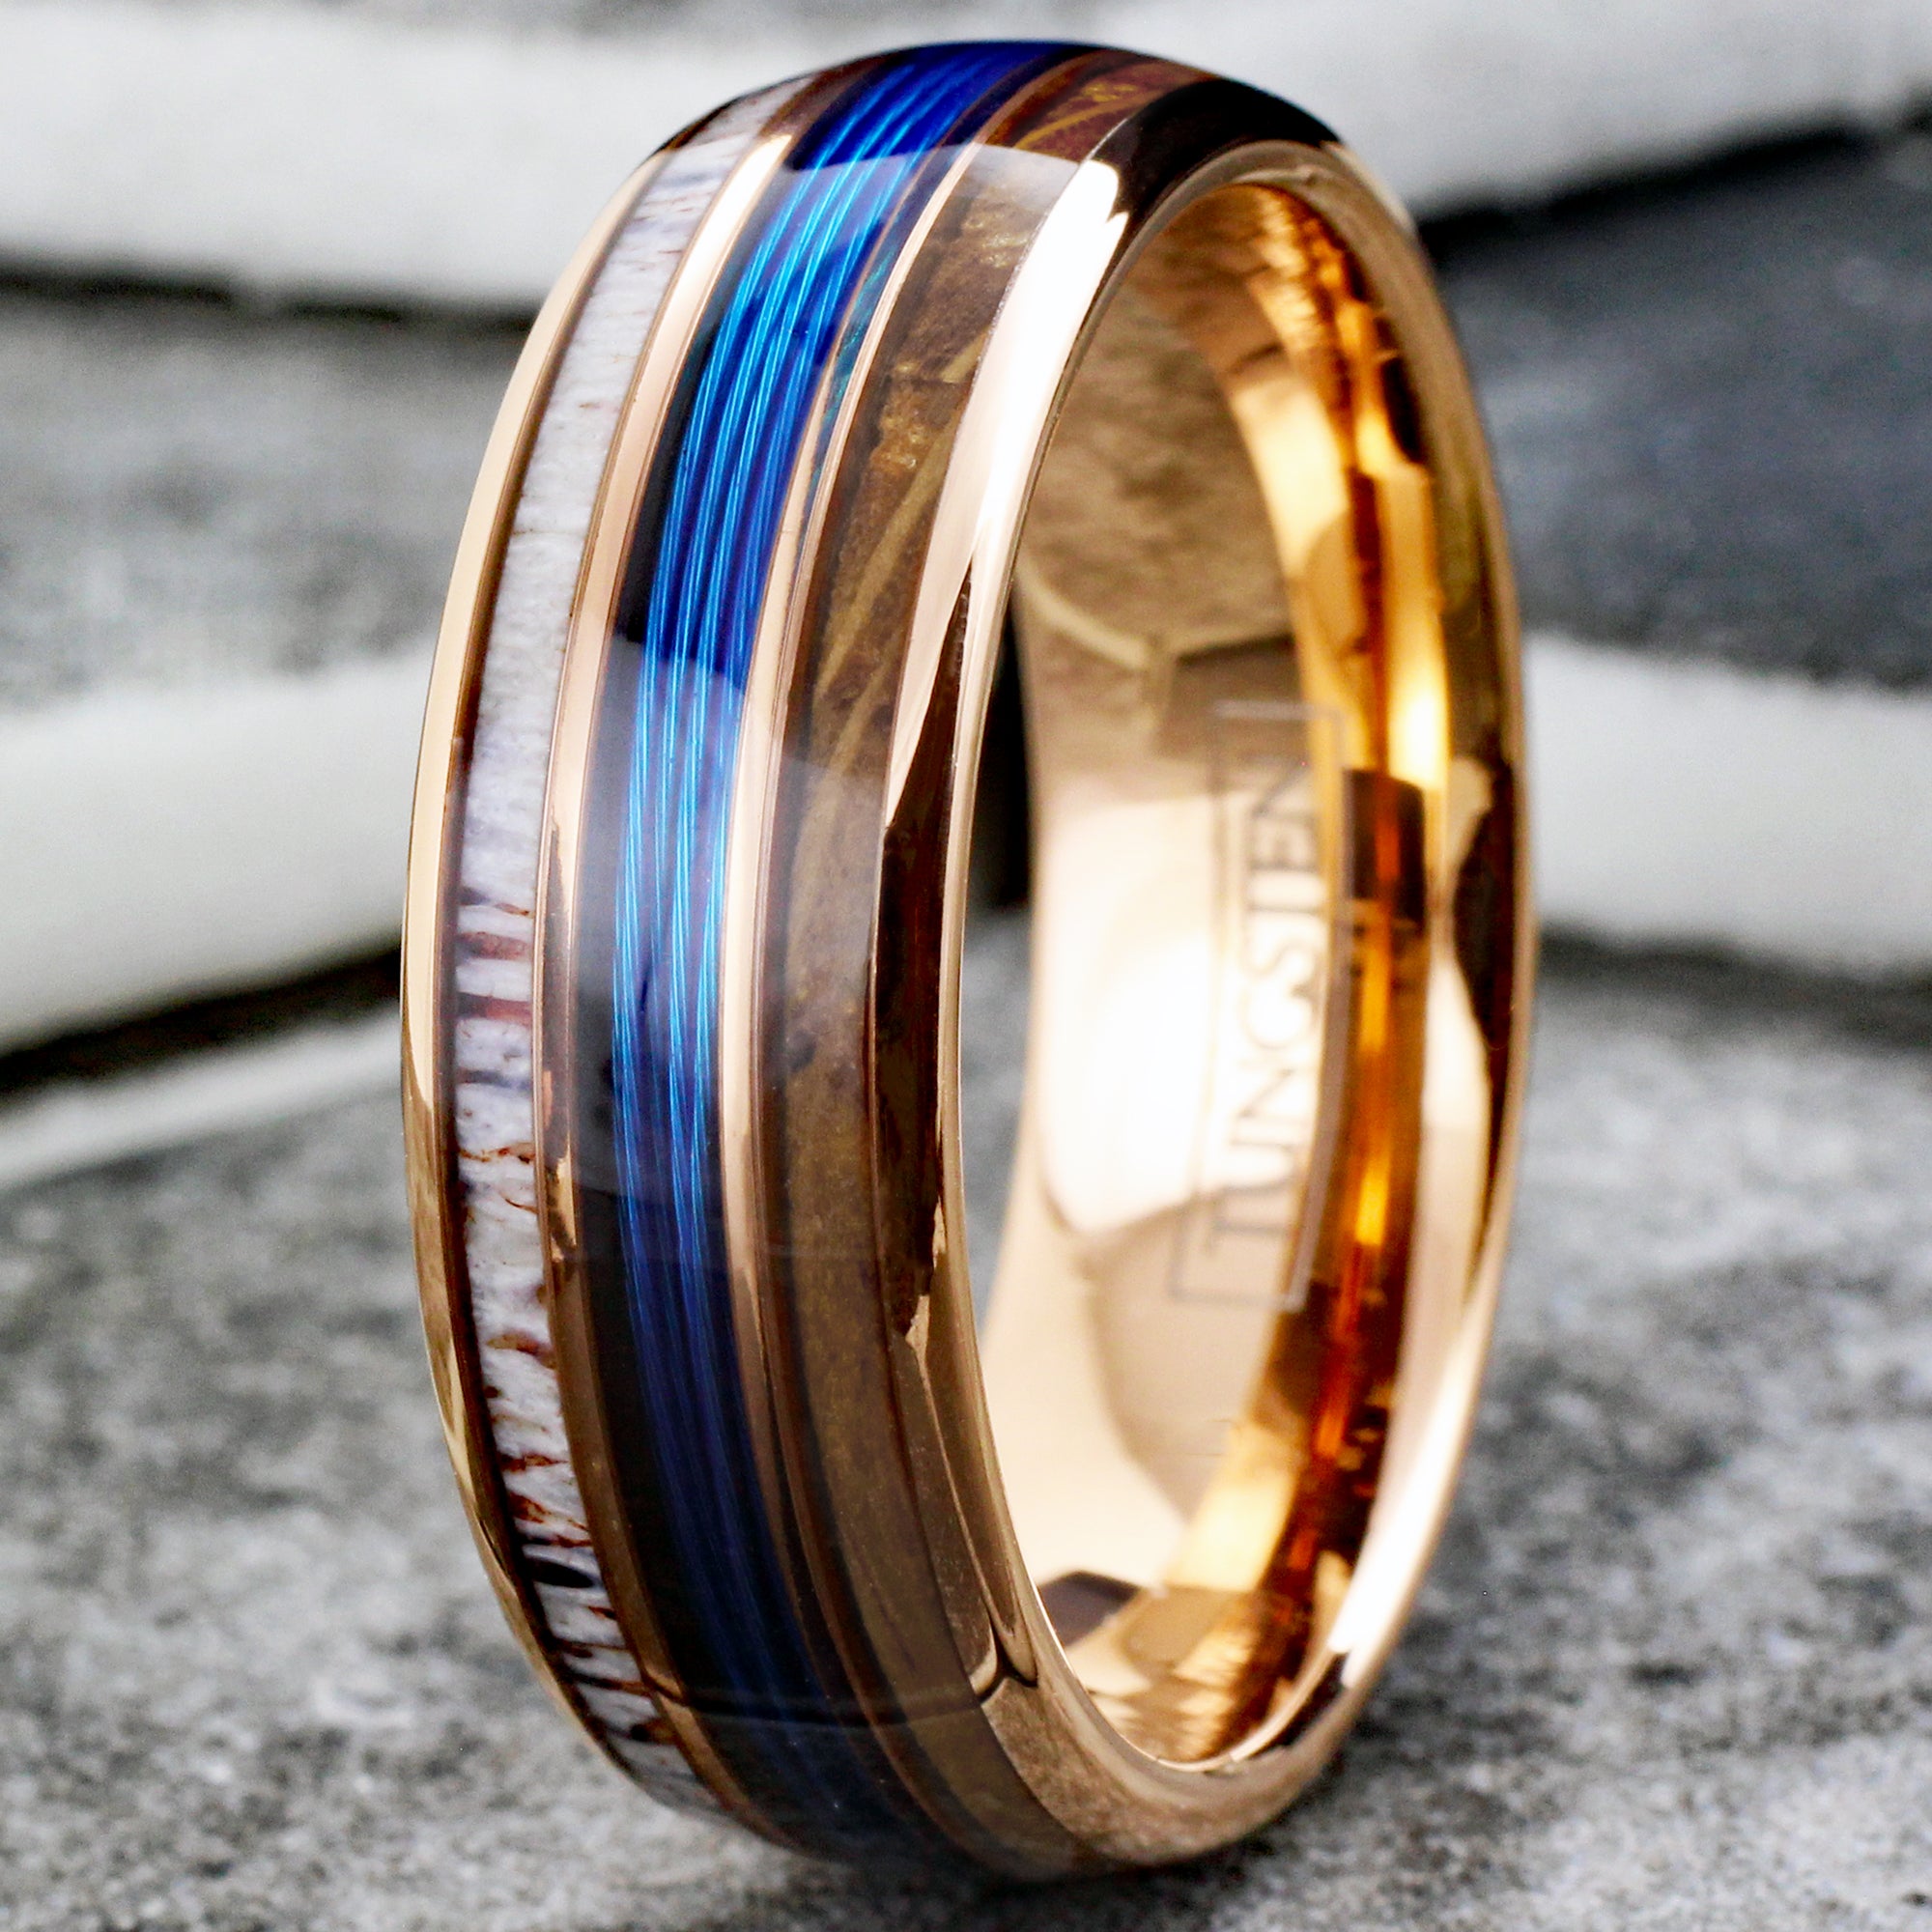 https://www.kingscrossjewelry.com/cdn/shop/files/Rose-gold-tungsten-carbide-low-dome-band-ring-with-blue-fishing-line-between-whiskey-oak-barrel-wood-and-deer-antler-inlays-tungsten-rings-c-tile-photo.jpg?v=1706673365